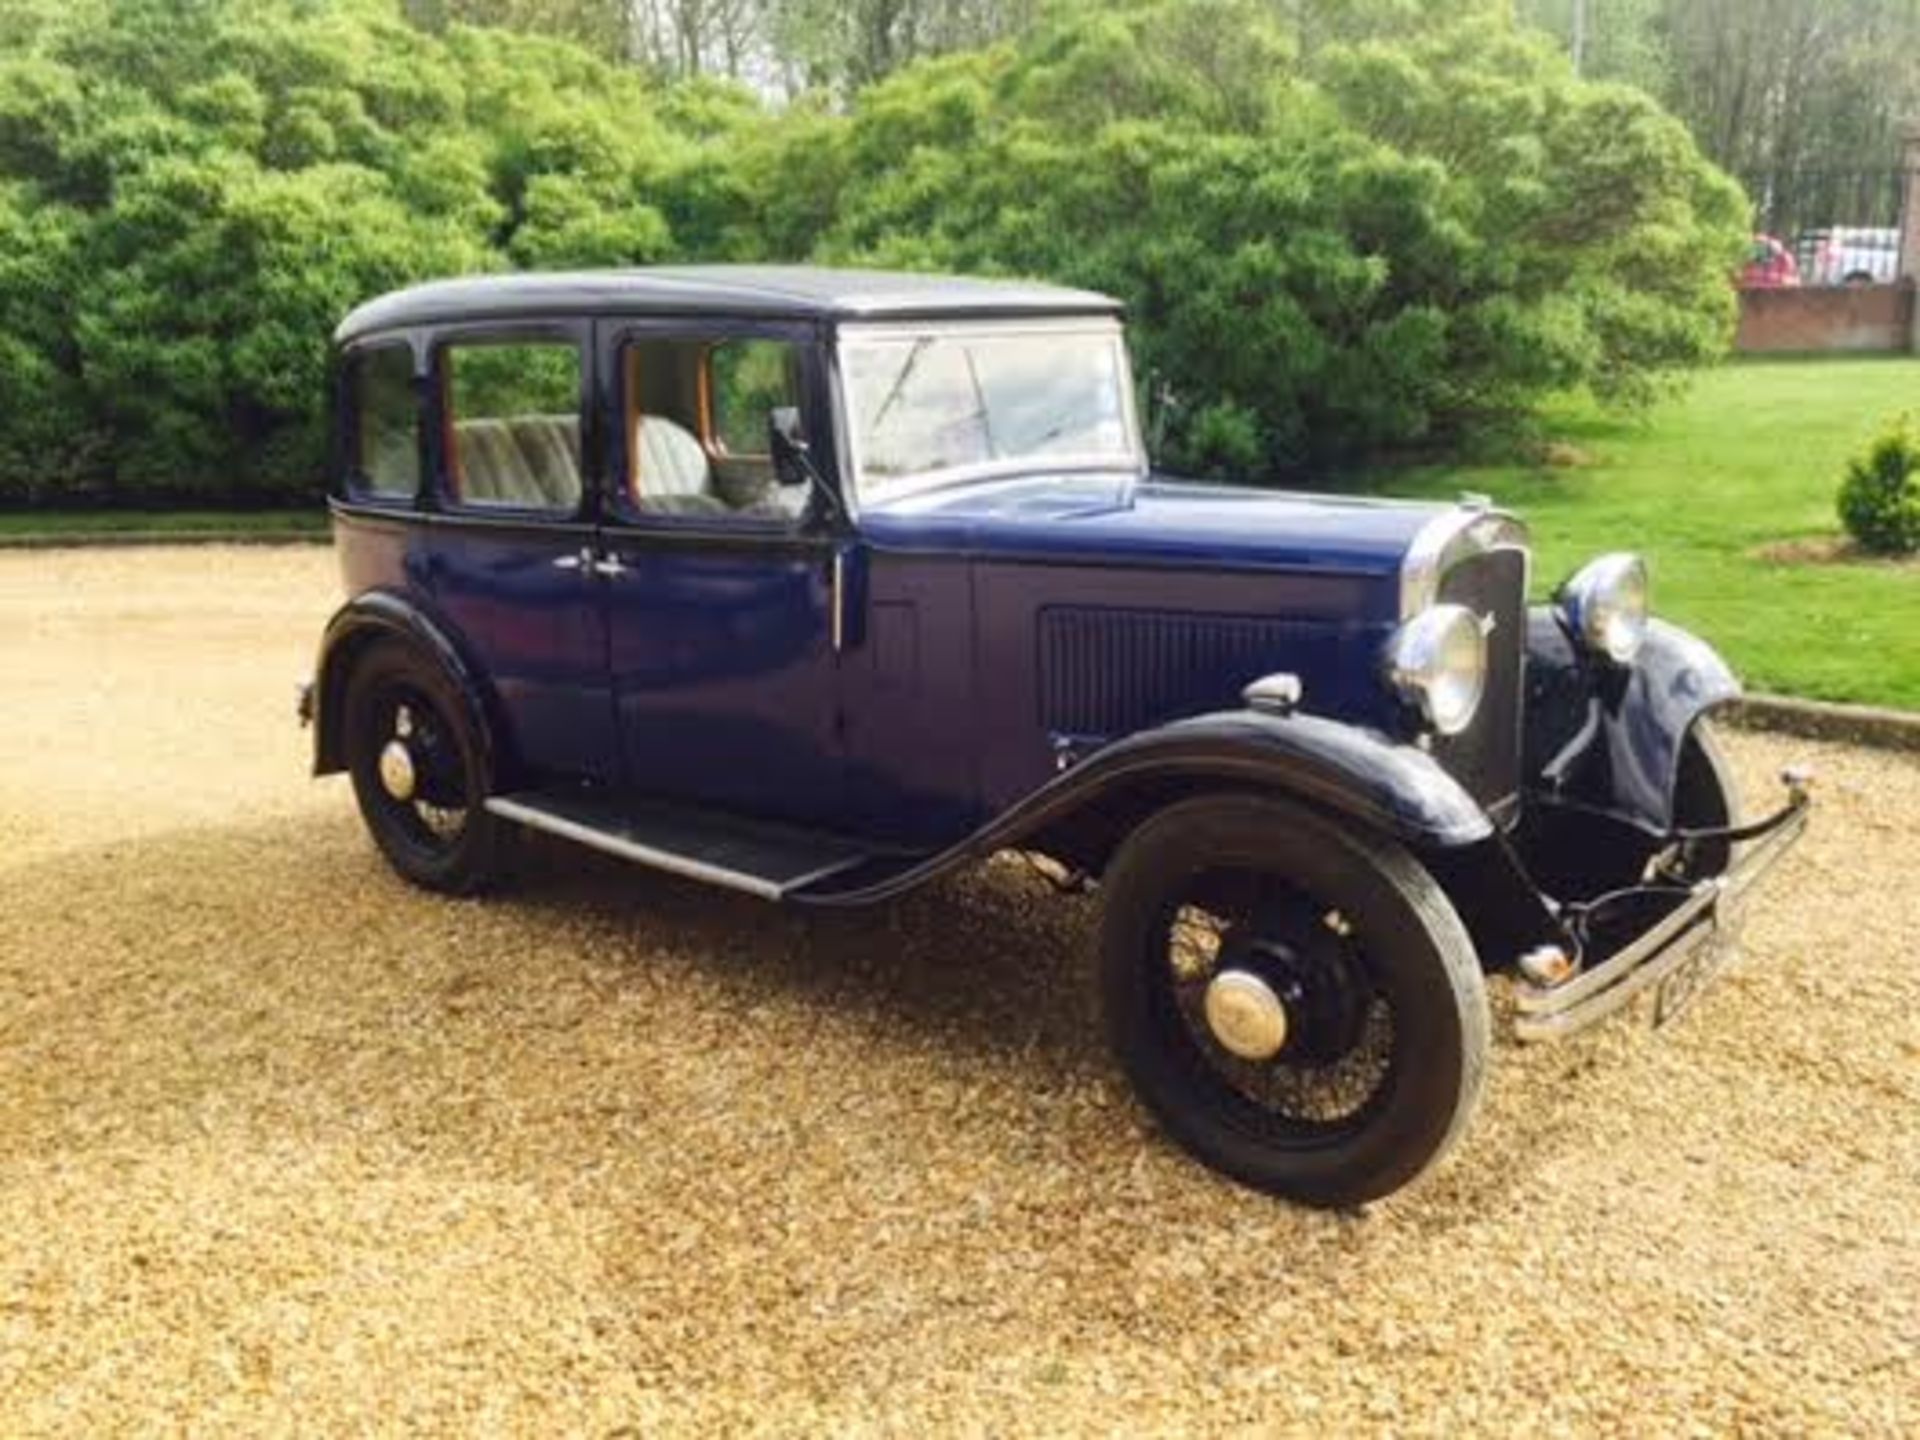 1933 Austin 12/4 in very good age related order up and running